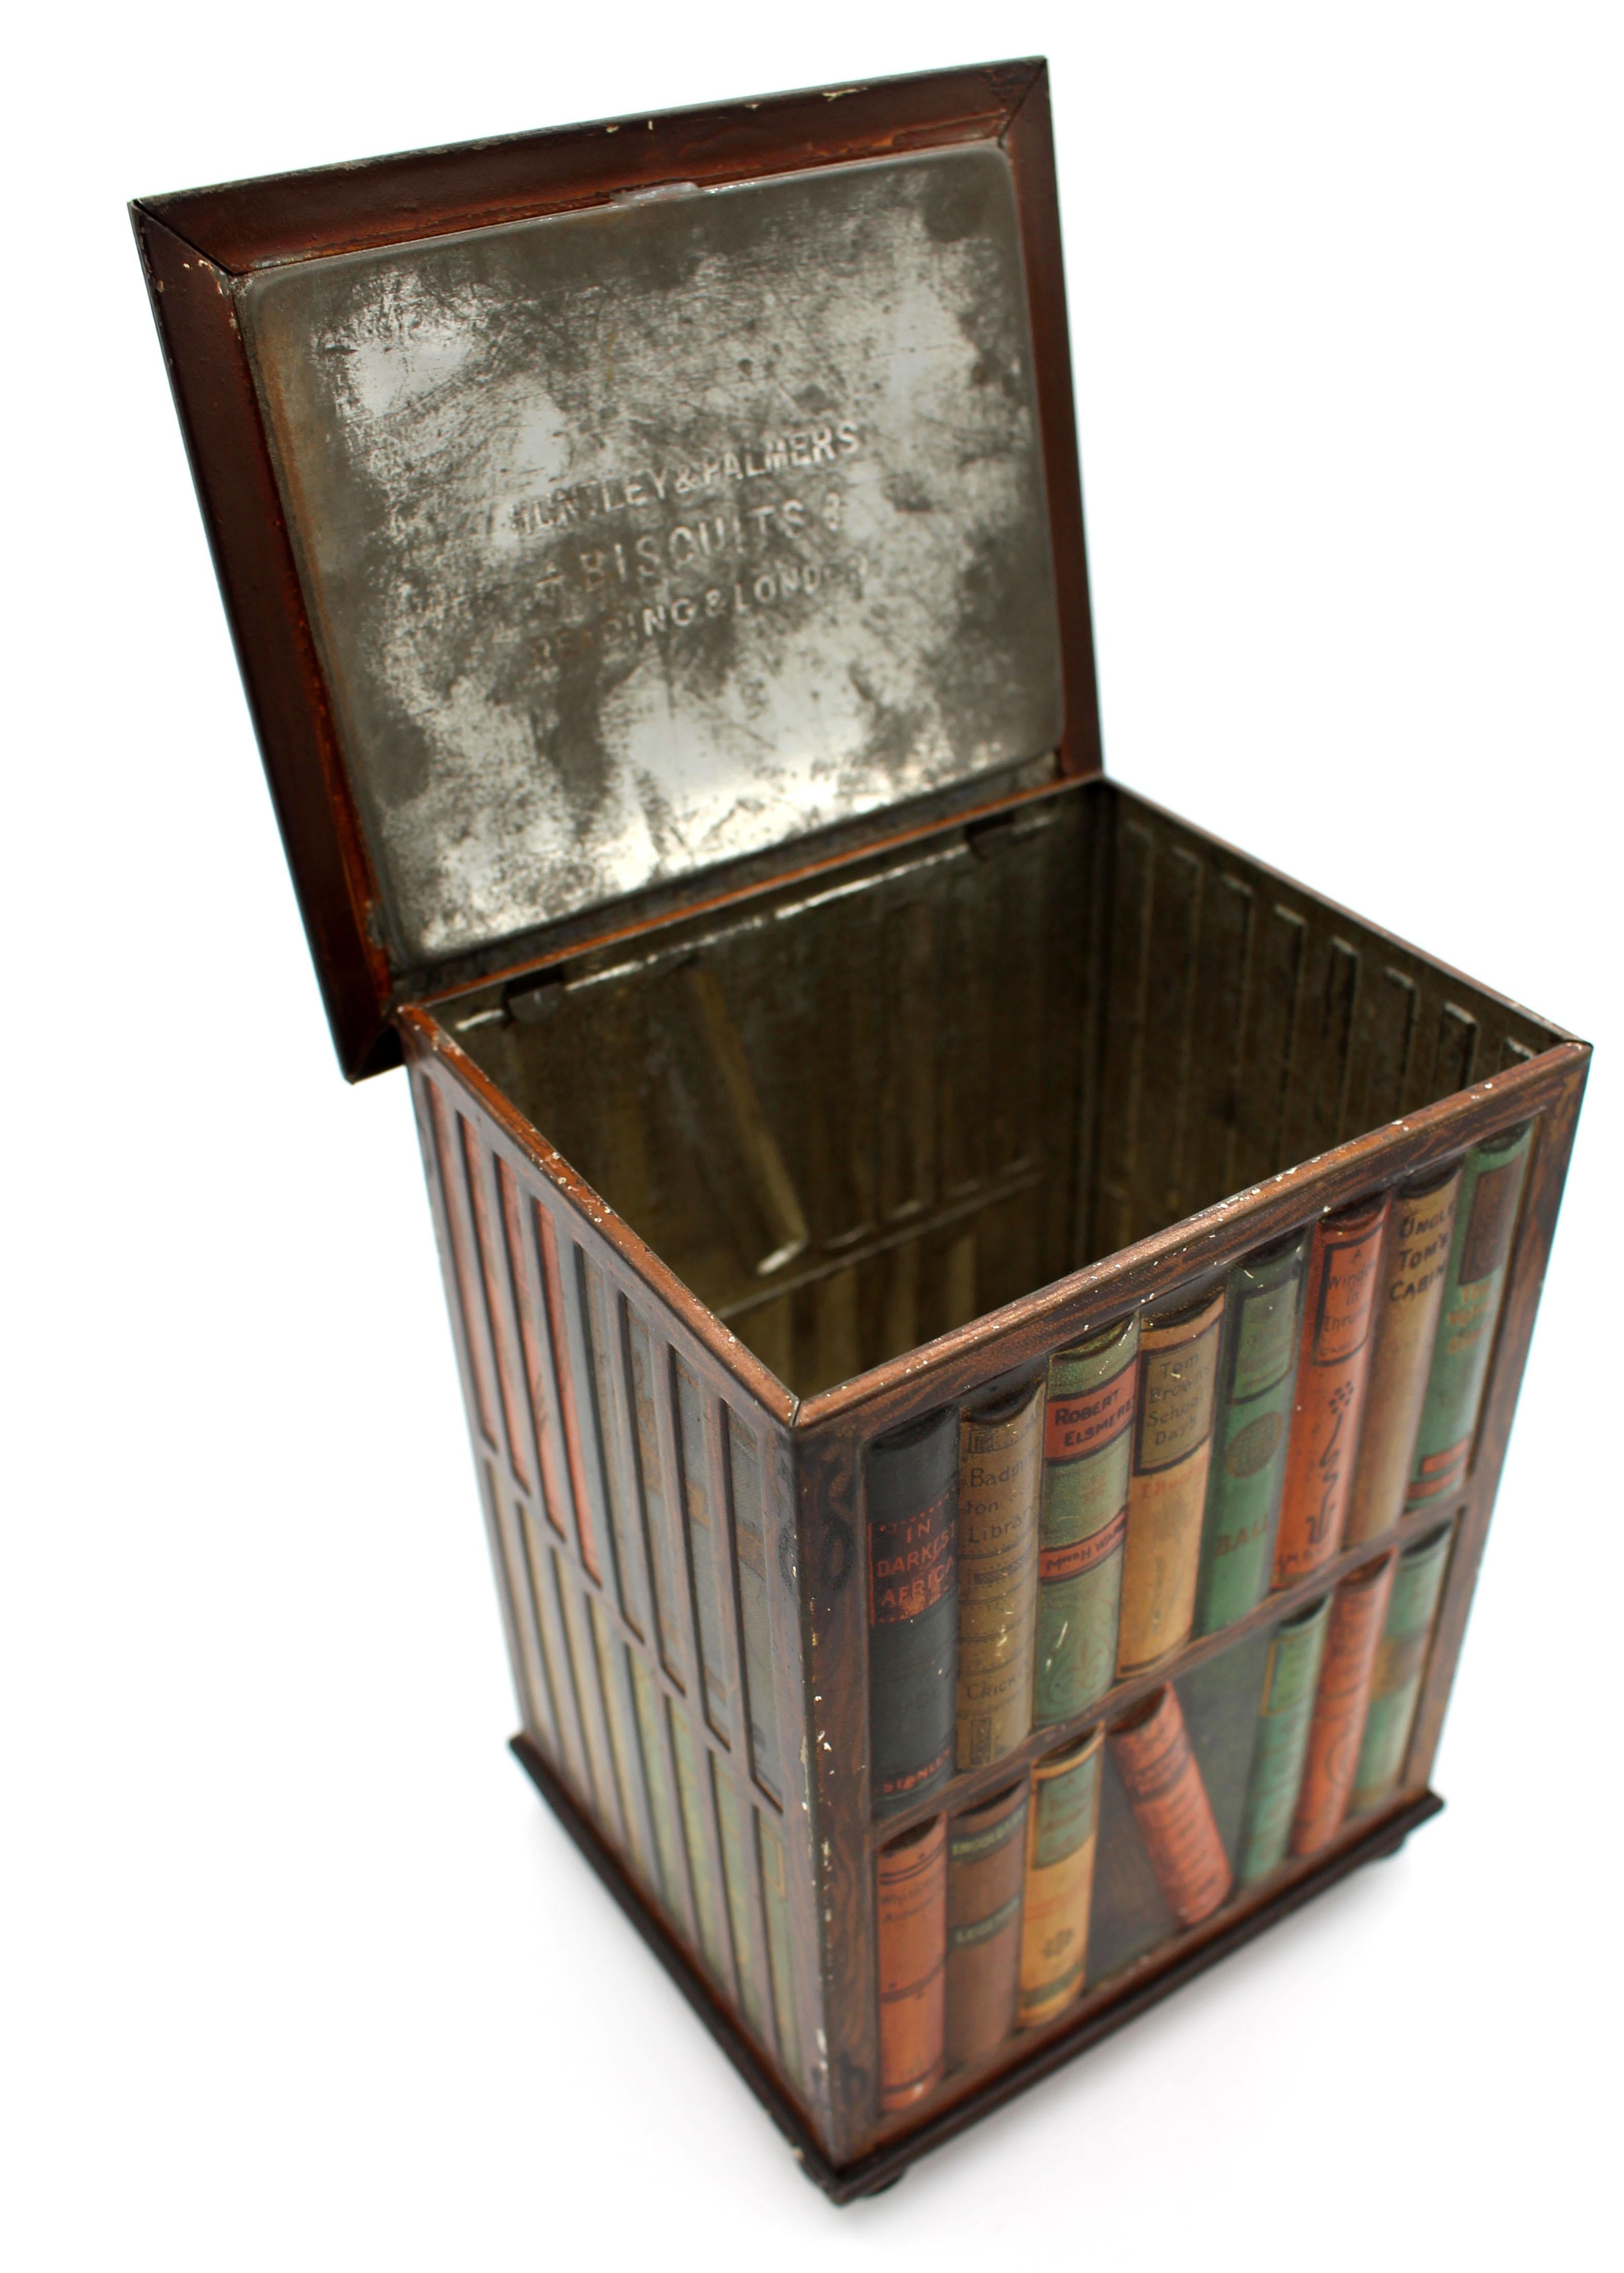 20th Century Faux Revolving Bookcase Biscuit Tin Box by Huntley & Palmers, 1905, English For Sale